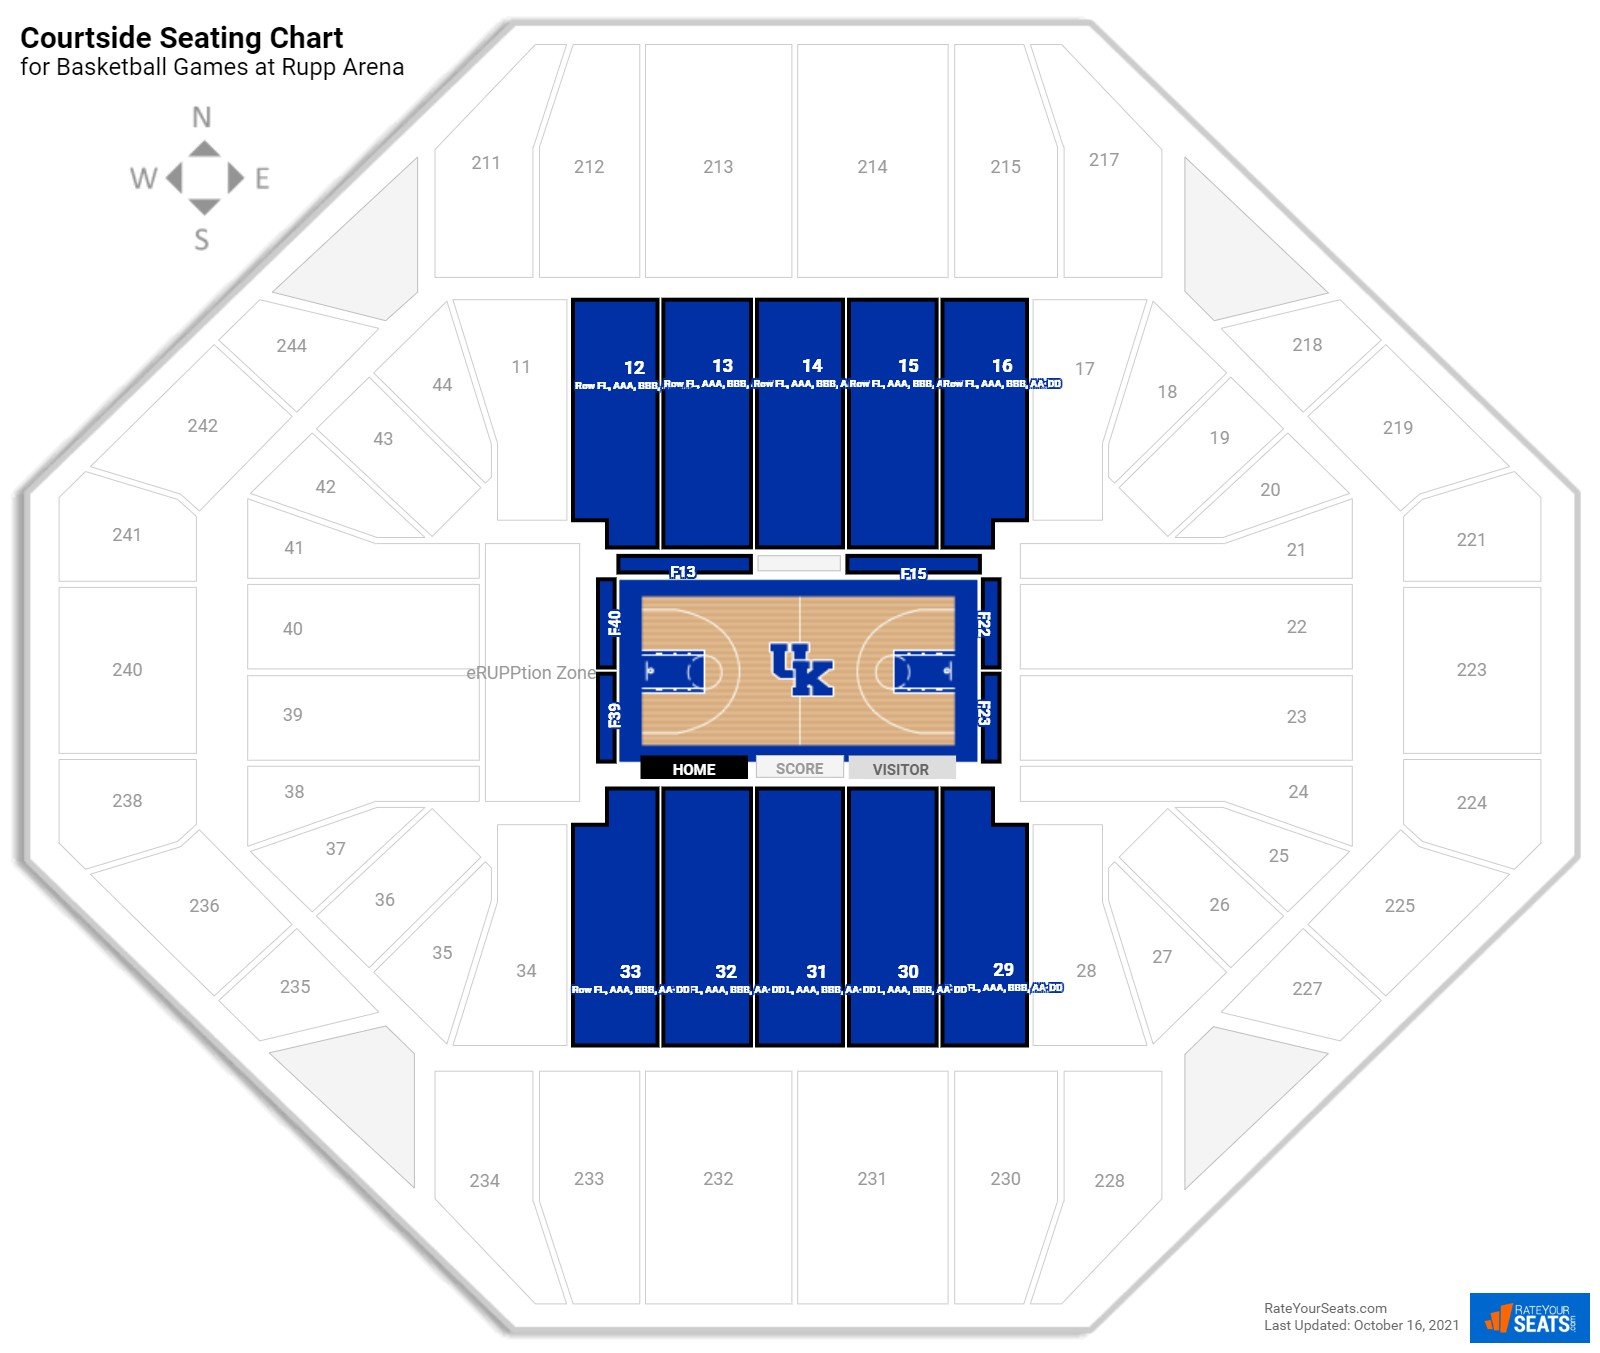 Basketball Courtside Seating Chart at Rupp Arena